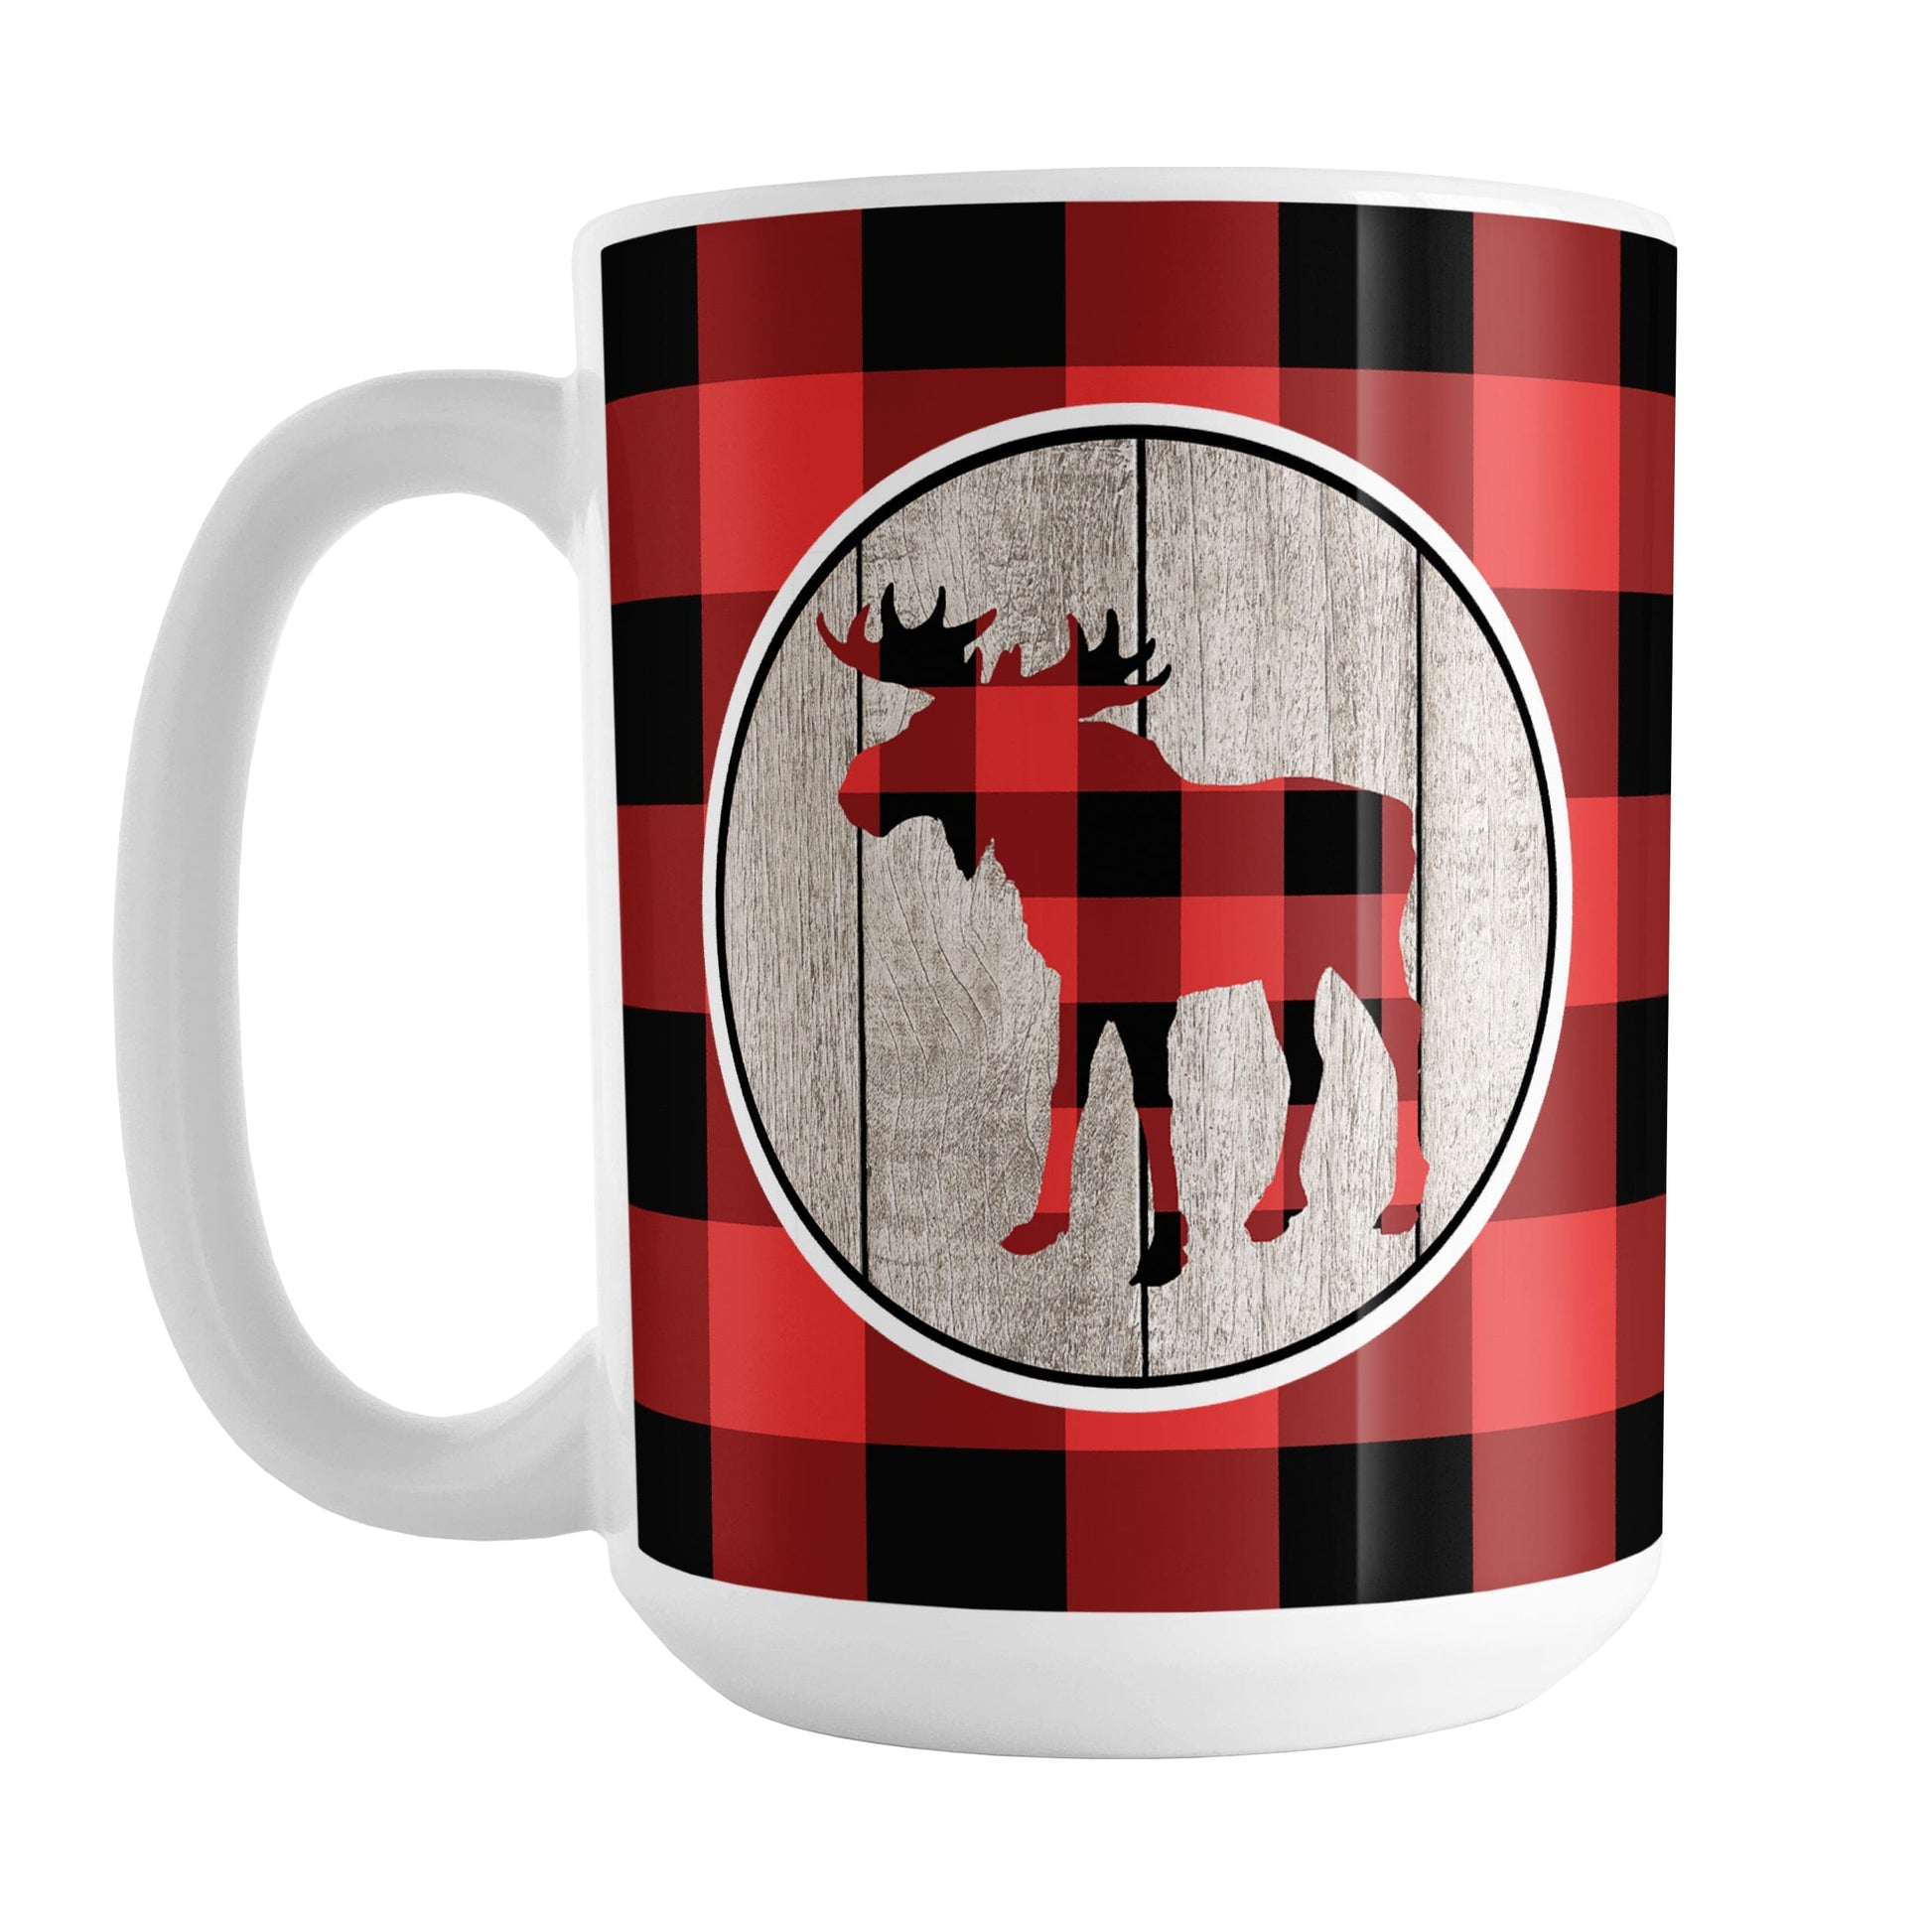 Rustic Red Buffalo Plaid Moose Mug (15oz) at Amy's Coffee Mugs. A ceramic coffee mug designed with a red and black buffalo plaid pattern moose silhouette in a rustic wood circle design, on both sides of the mug over a red and black buffalo plaid pattern.